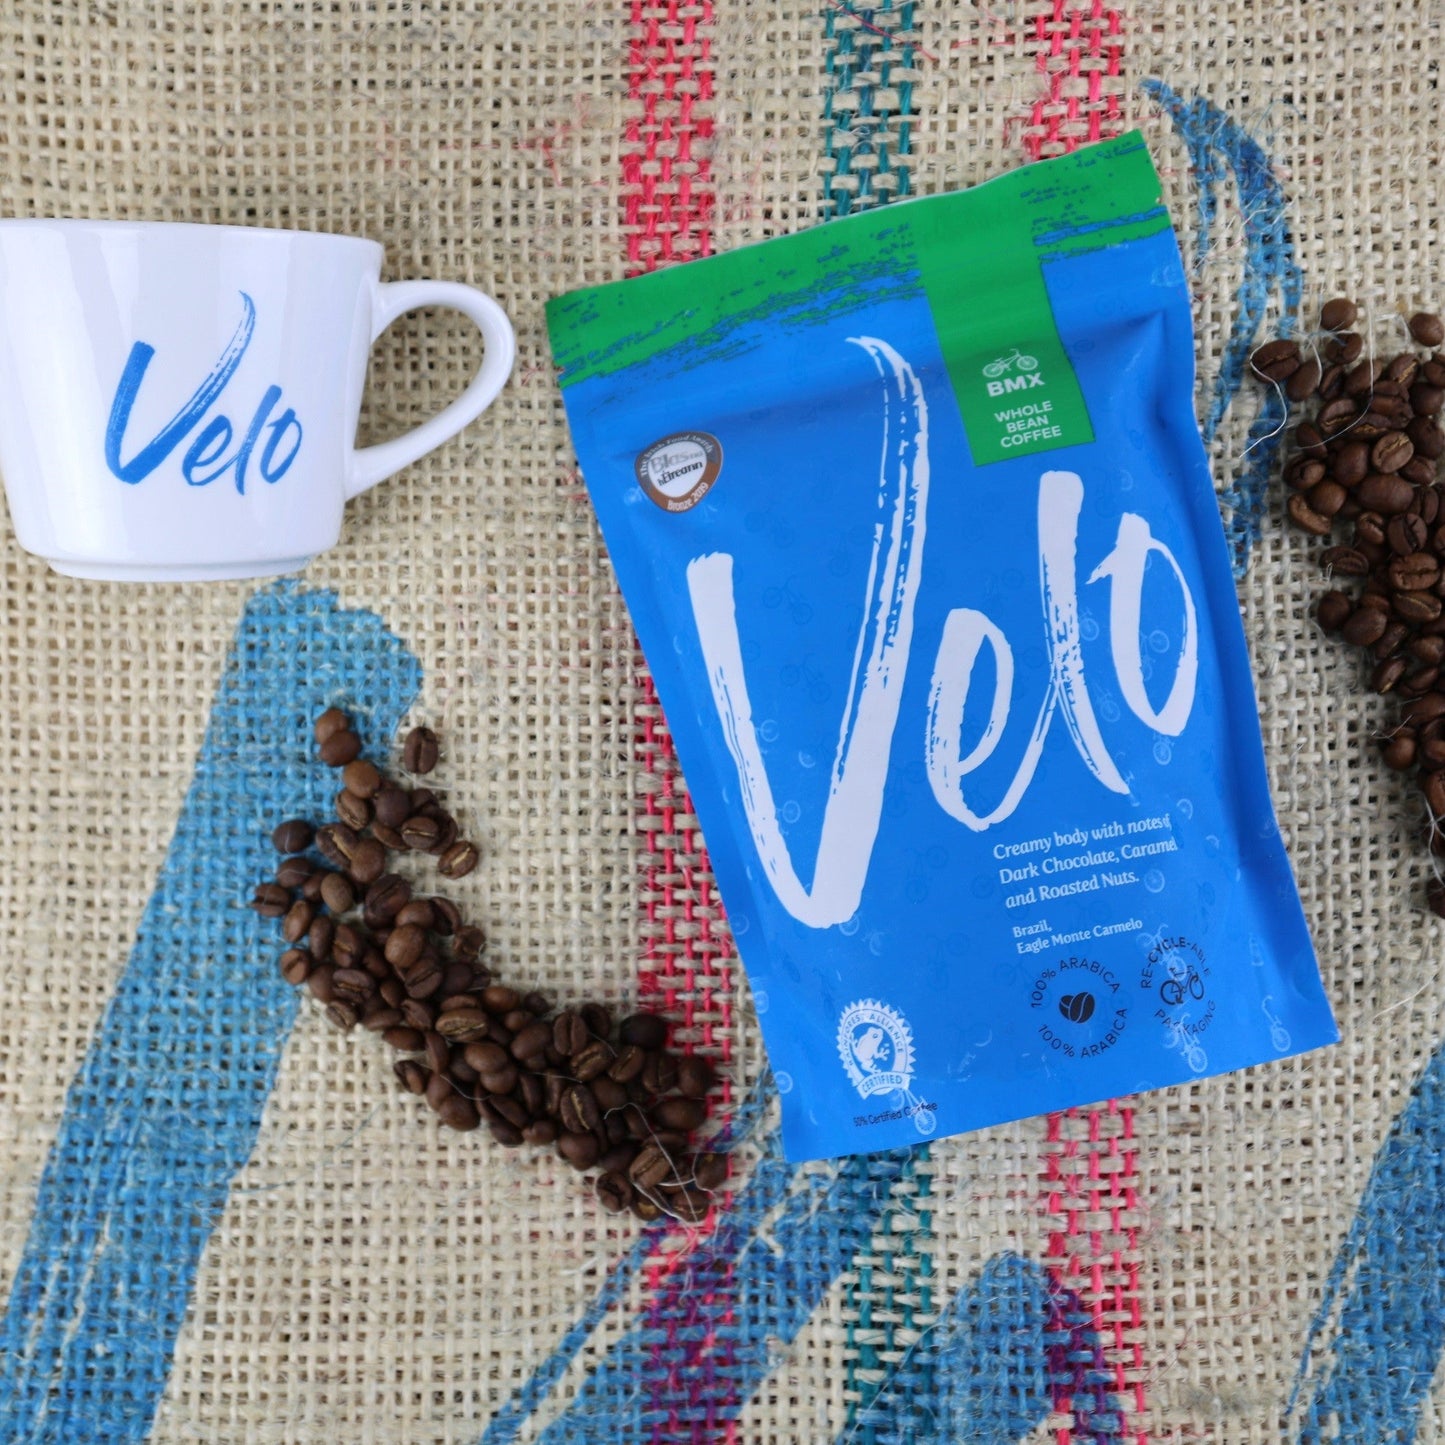 BMX 200g Brazil Coffee - Blue and Green Coffee Bag with White Velo Across the bag Whole Bean - Velo Coffee Roasters